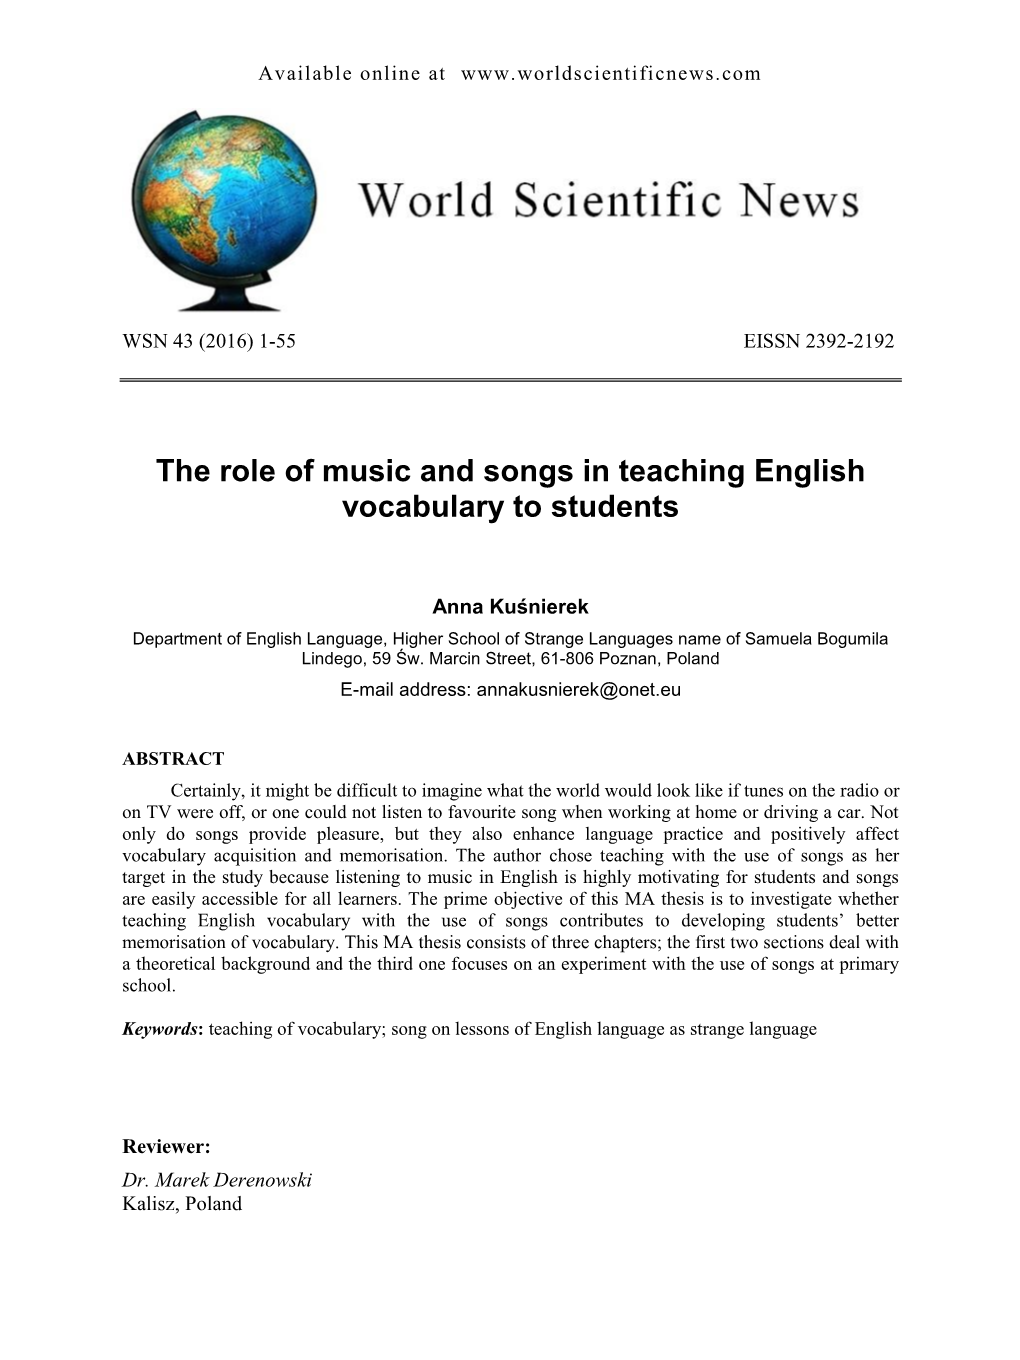 The Role of Music and Songs in Teaching English Vocabulary to Students